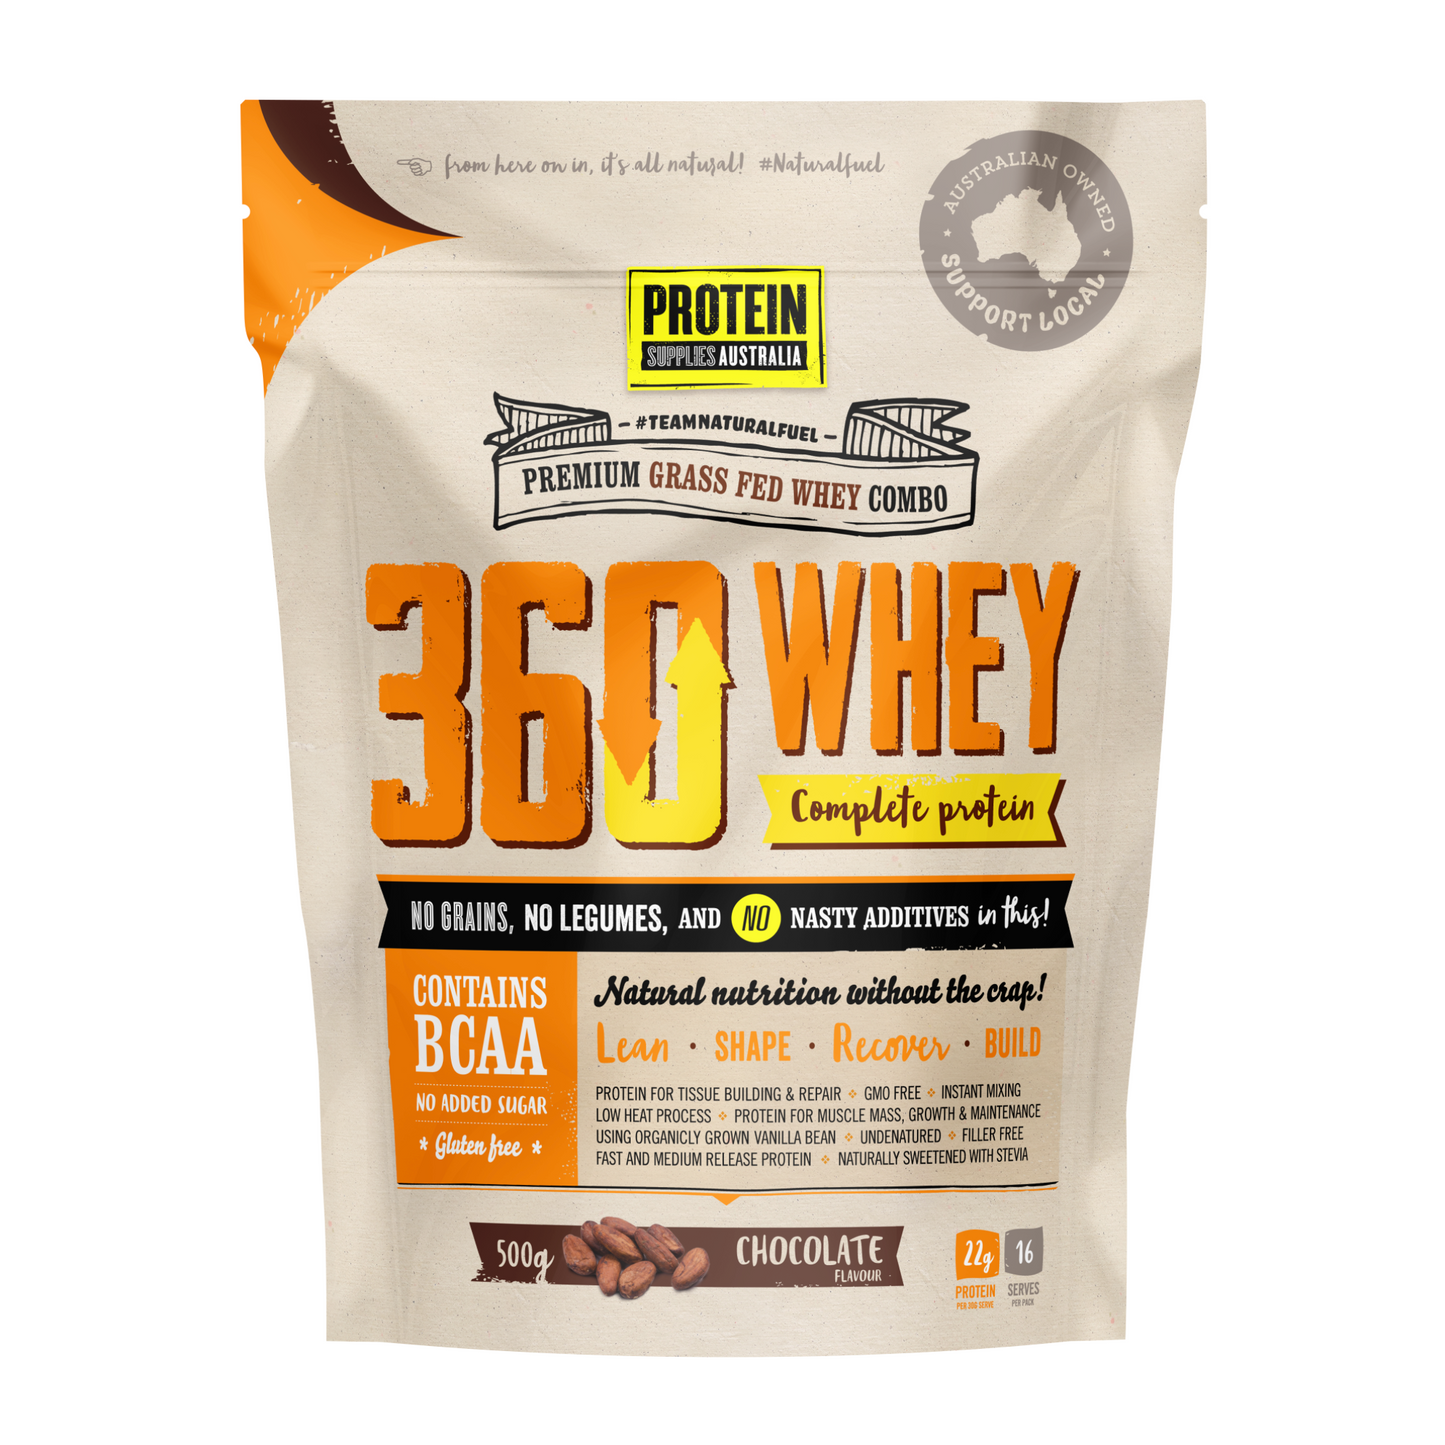 Protein Supplies Australia 360Whey (WPI+WPC Combo) 30g, 500g Or 1kg, Chocolate Flavour